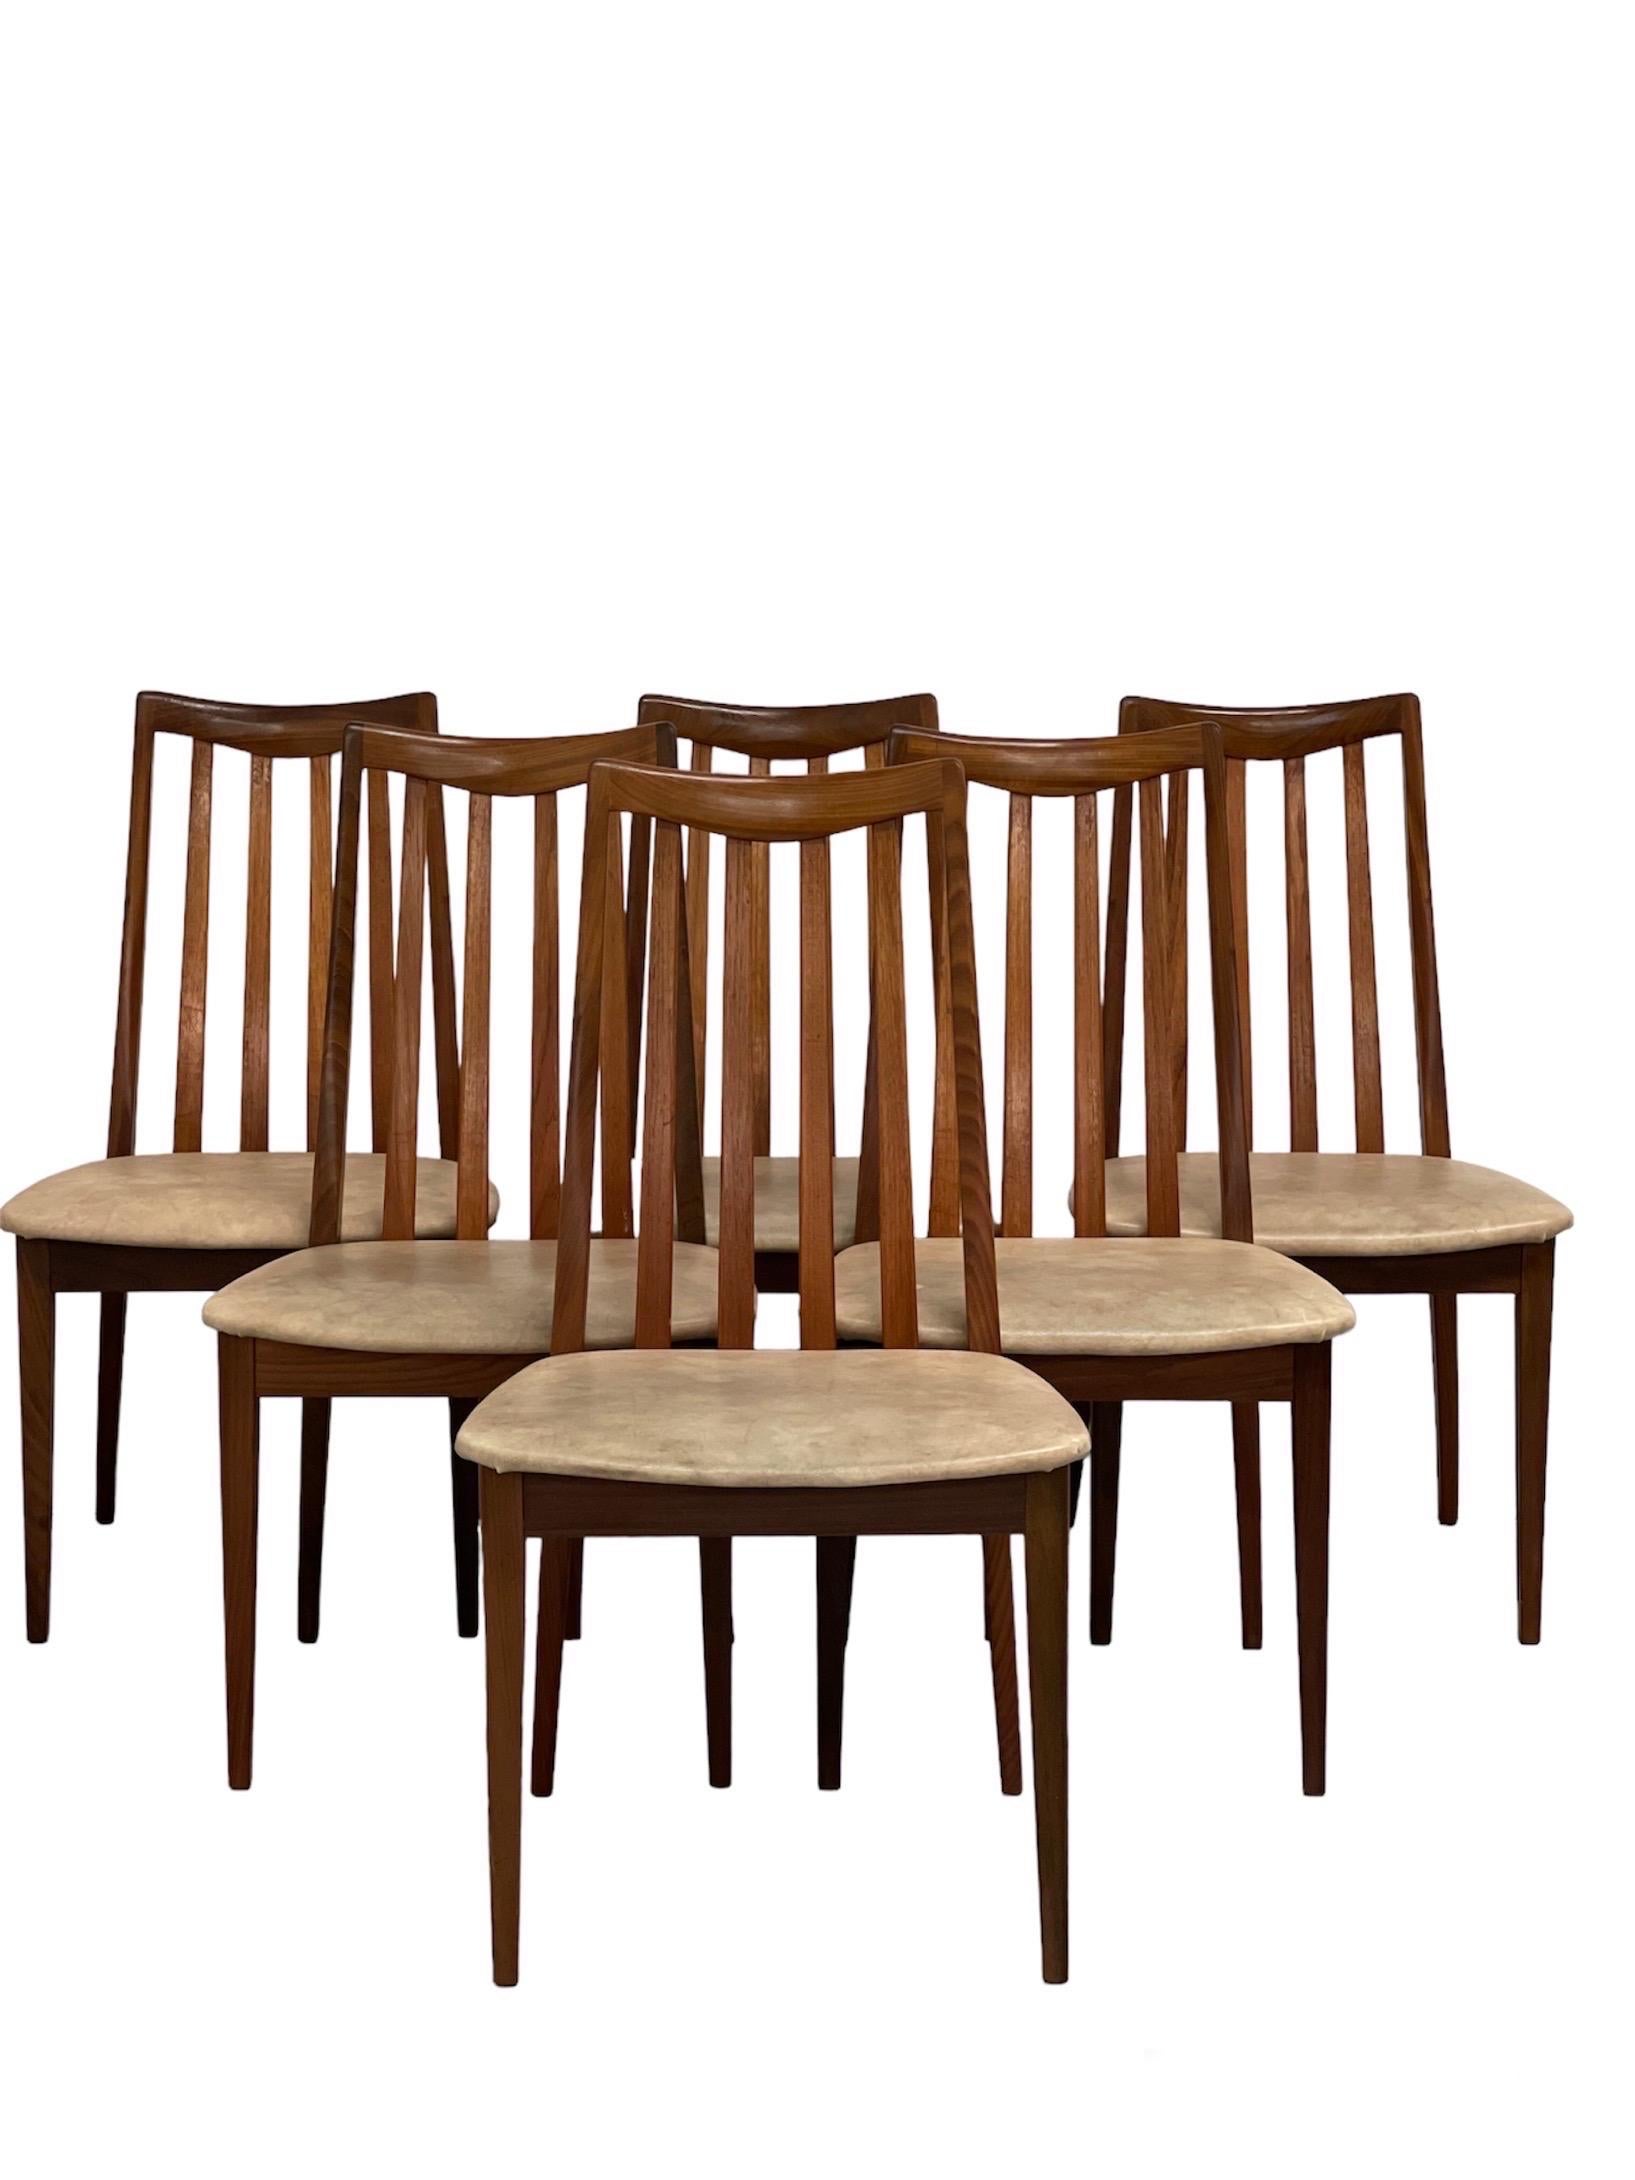 Danish style ladder back dining chairs. Set of 6

Dimensions. 19 W ; 21 D ; 36 H

Seat Height 17.